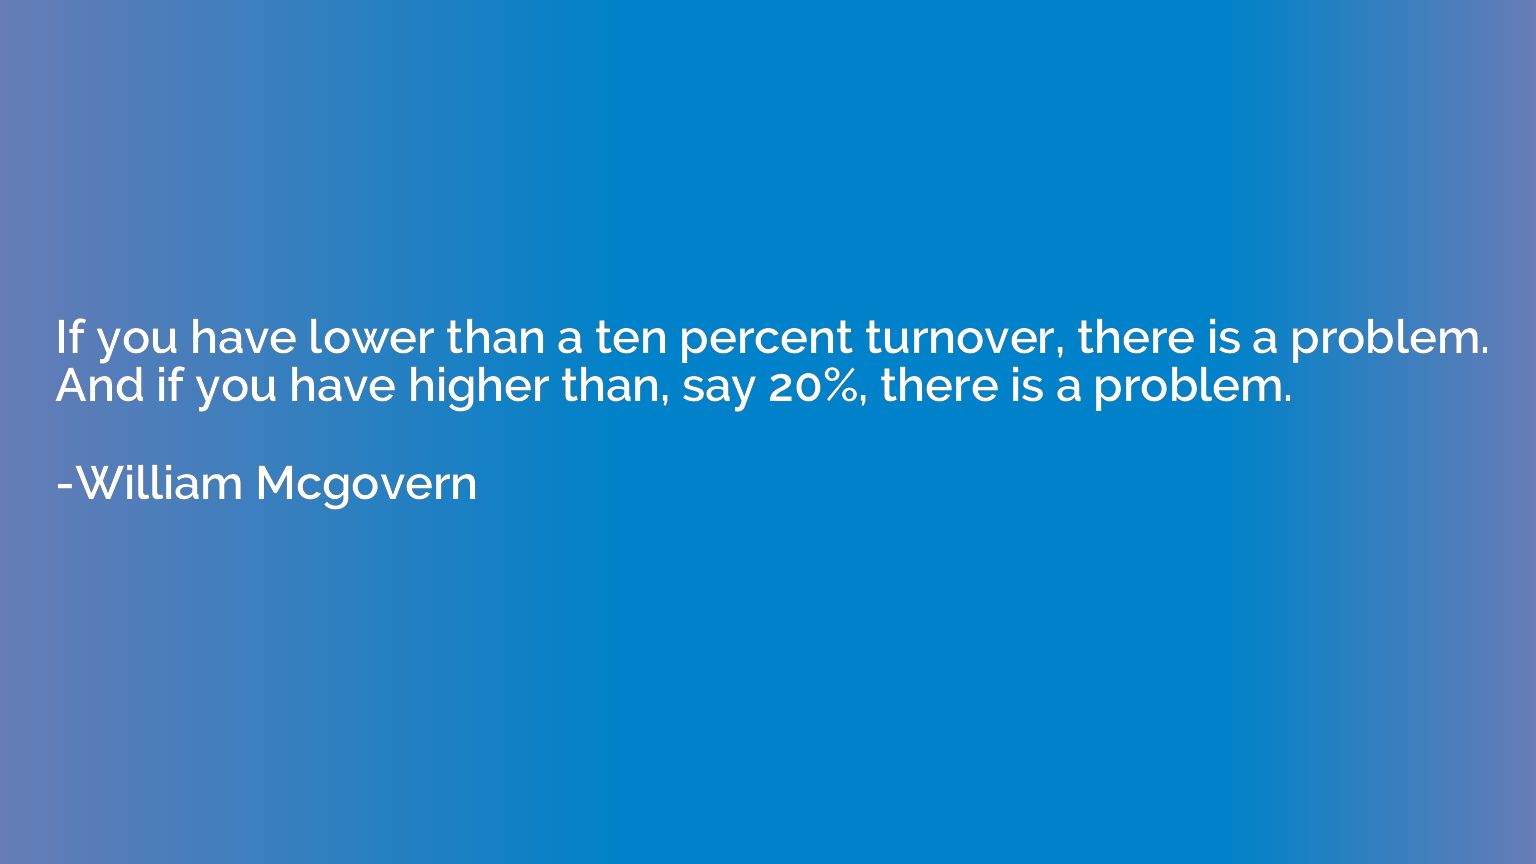 If you have lower than a ten percent turnover, there is a pr